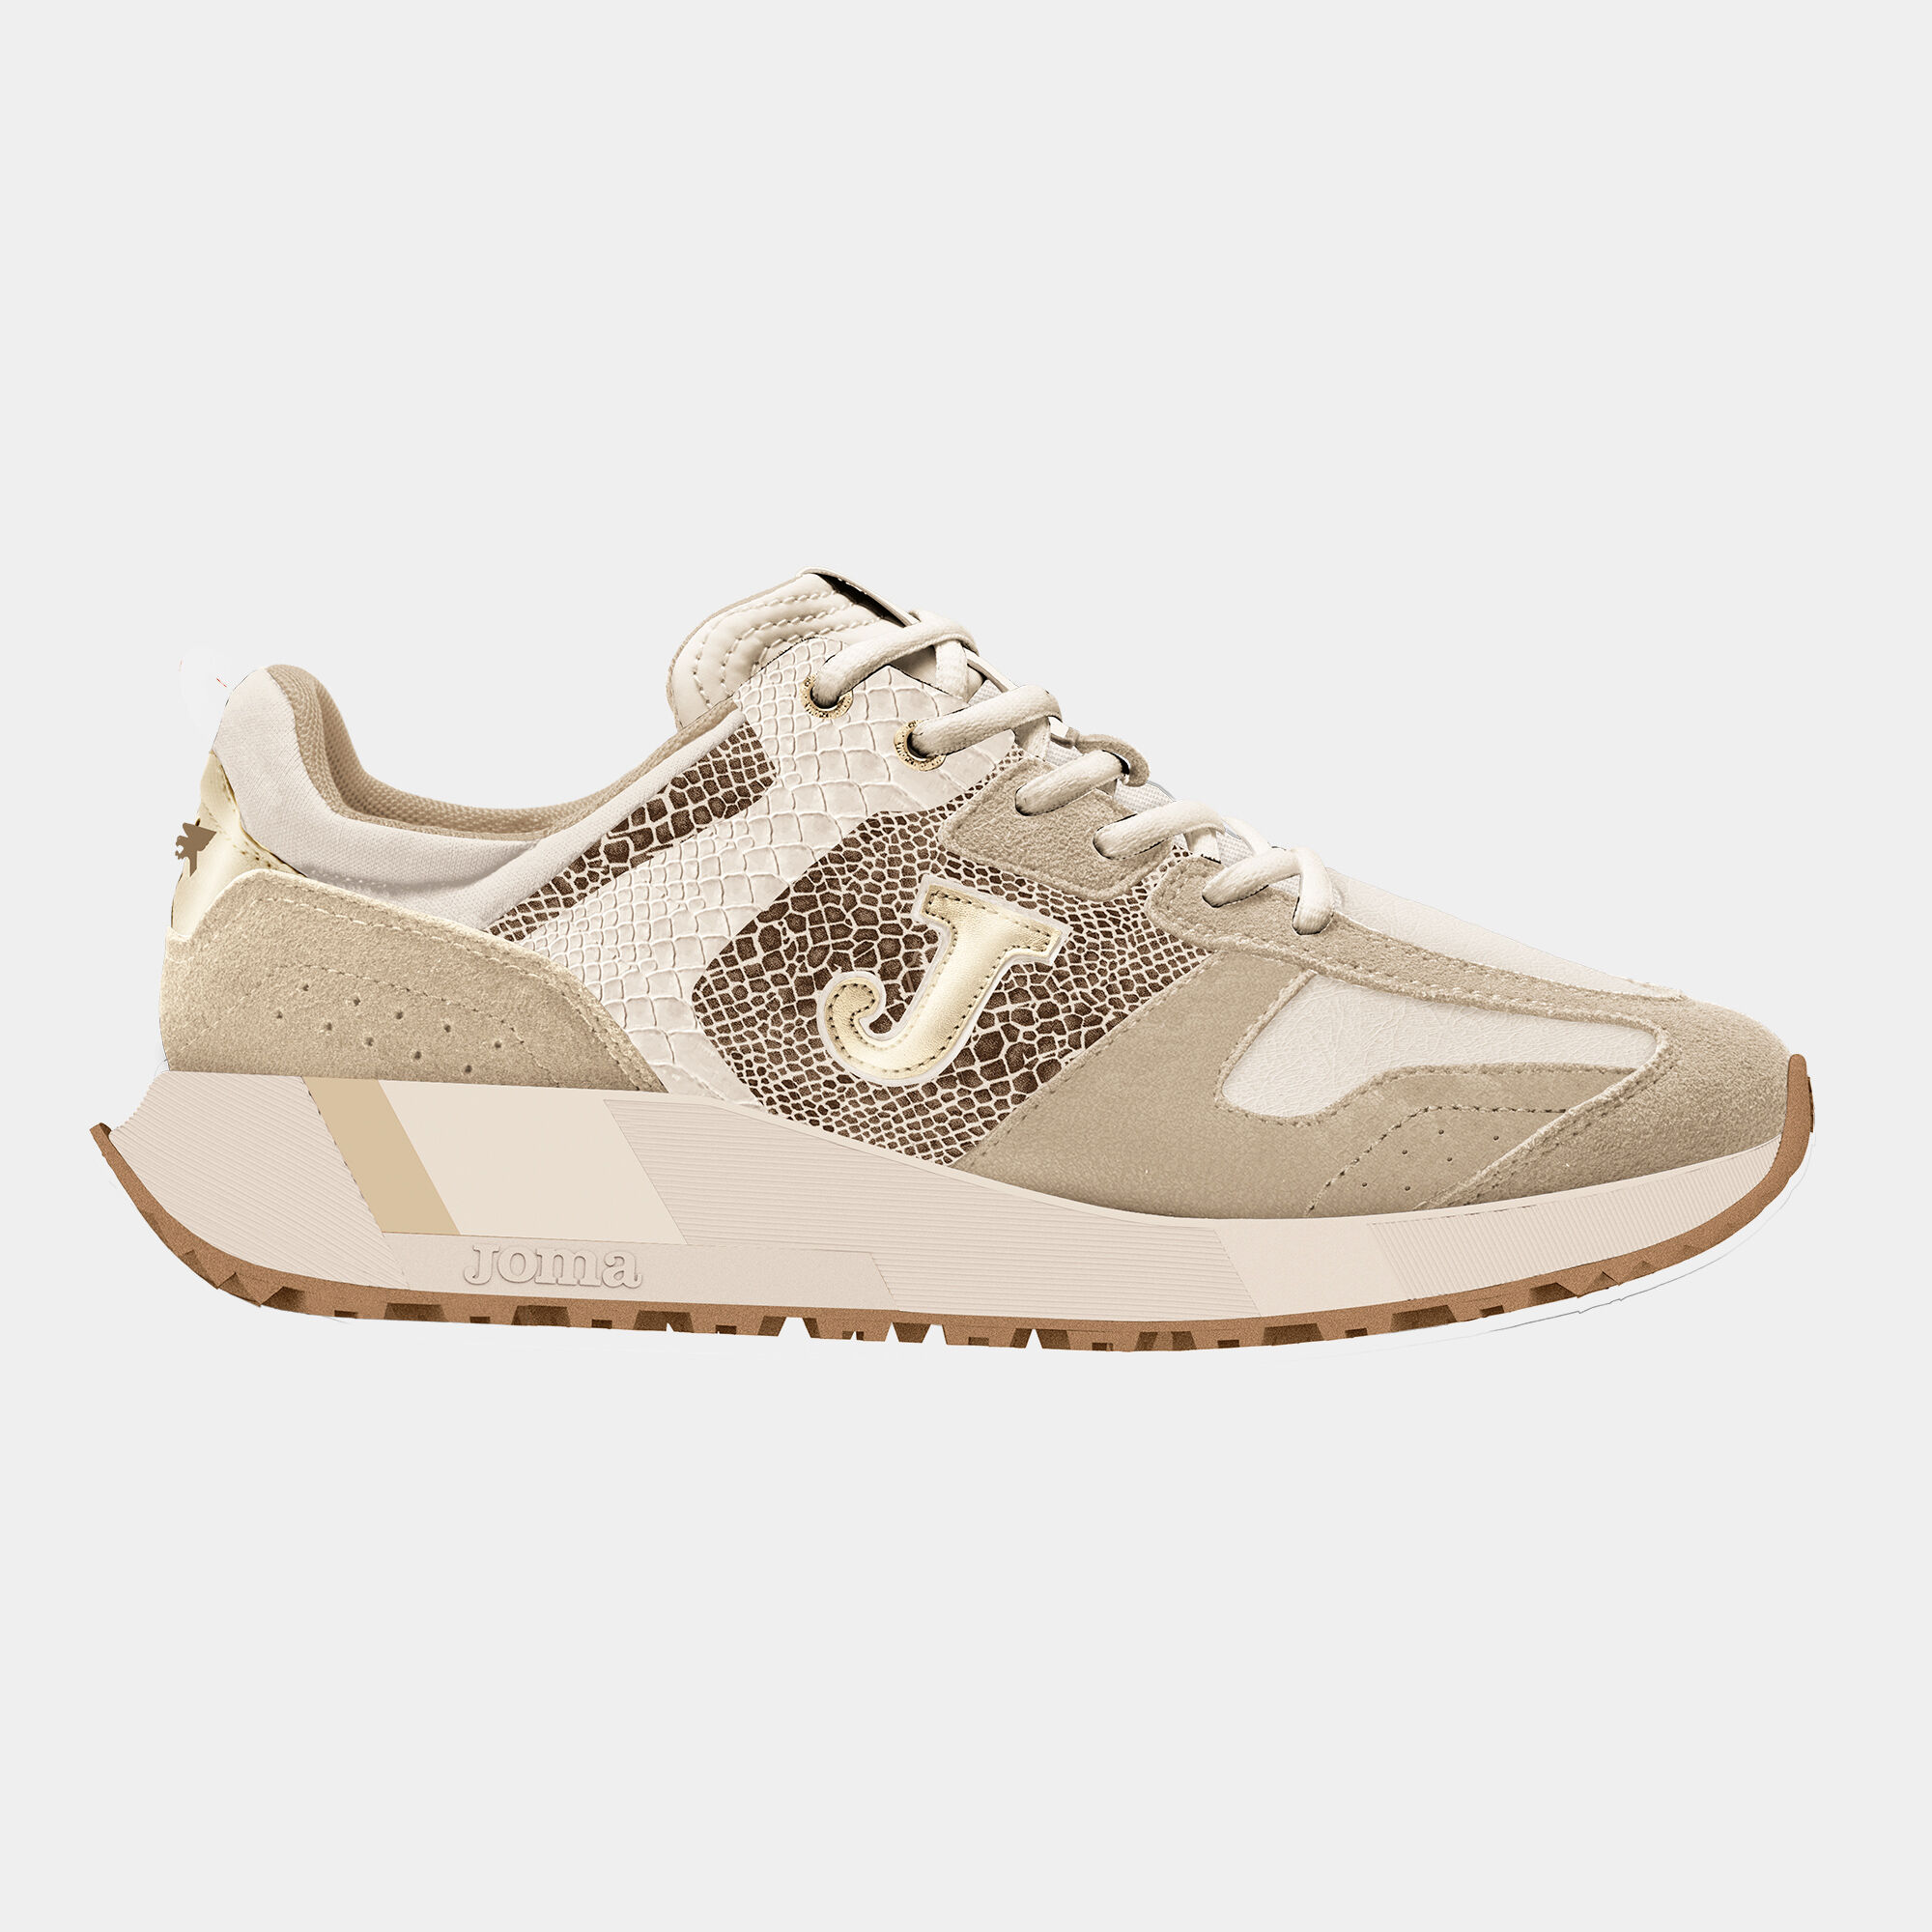 CHAUSSURES CASUAL C.1986 22 FEMME BEIGE